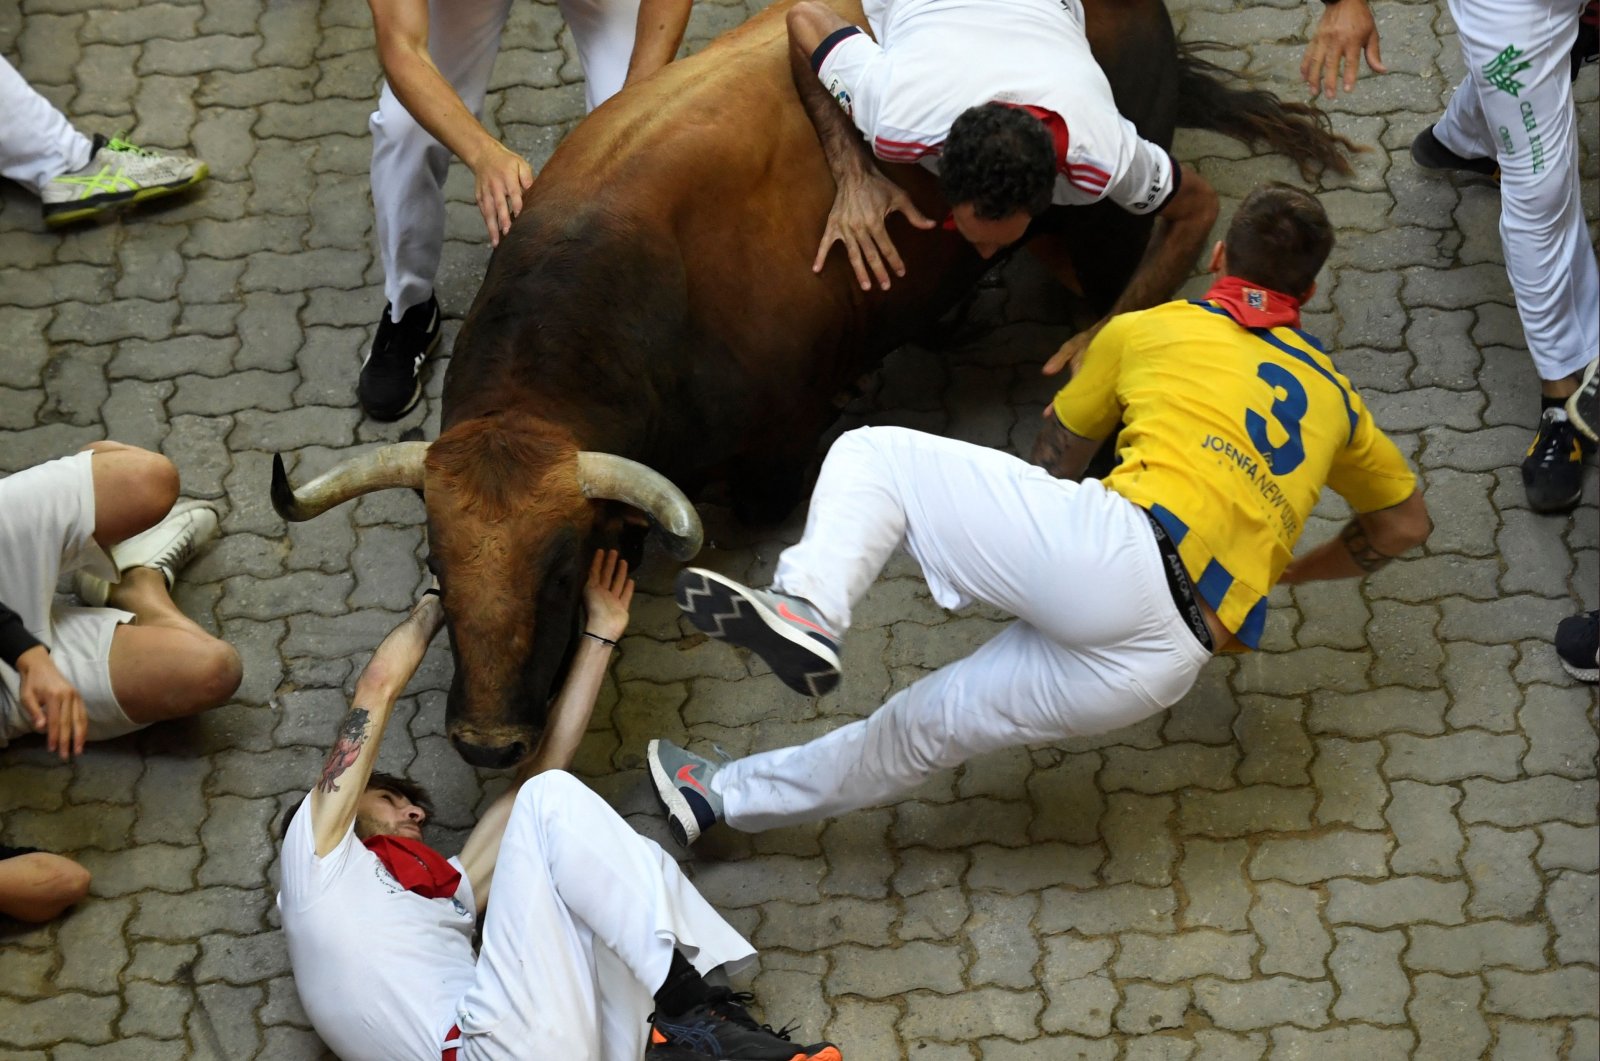 Participants grapple against a Jose Cebada Gago bull during the fifth &quot;encierro&quot; (bull run) of the San Fermin Festival in Pamplona, northern Spain on July 11, 2022. (AFP Photo)